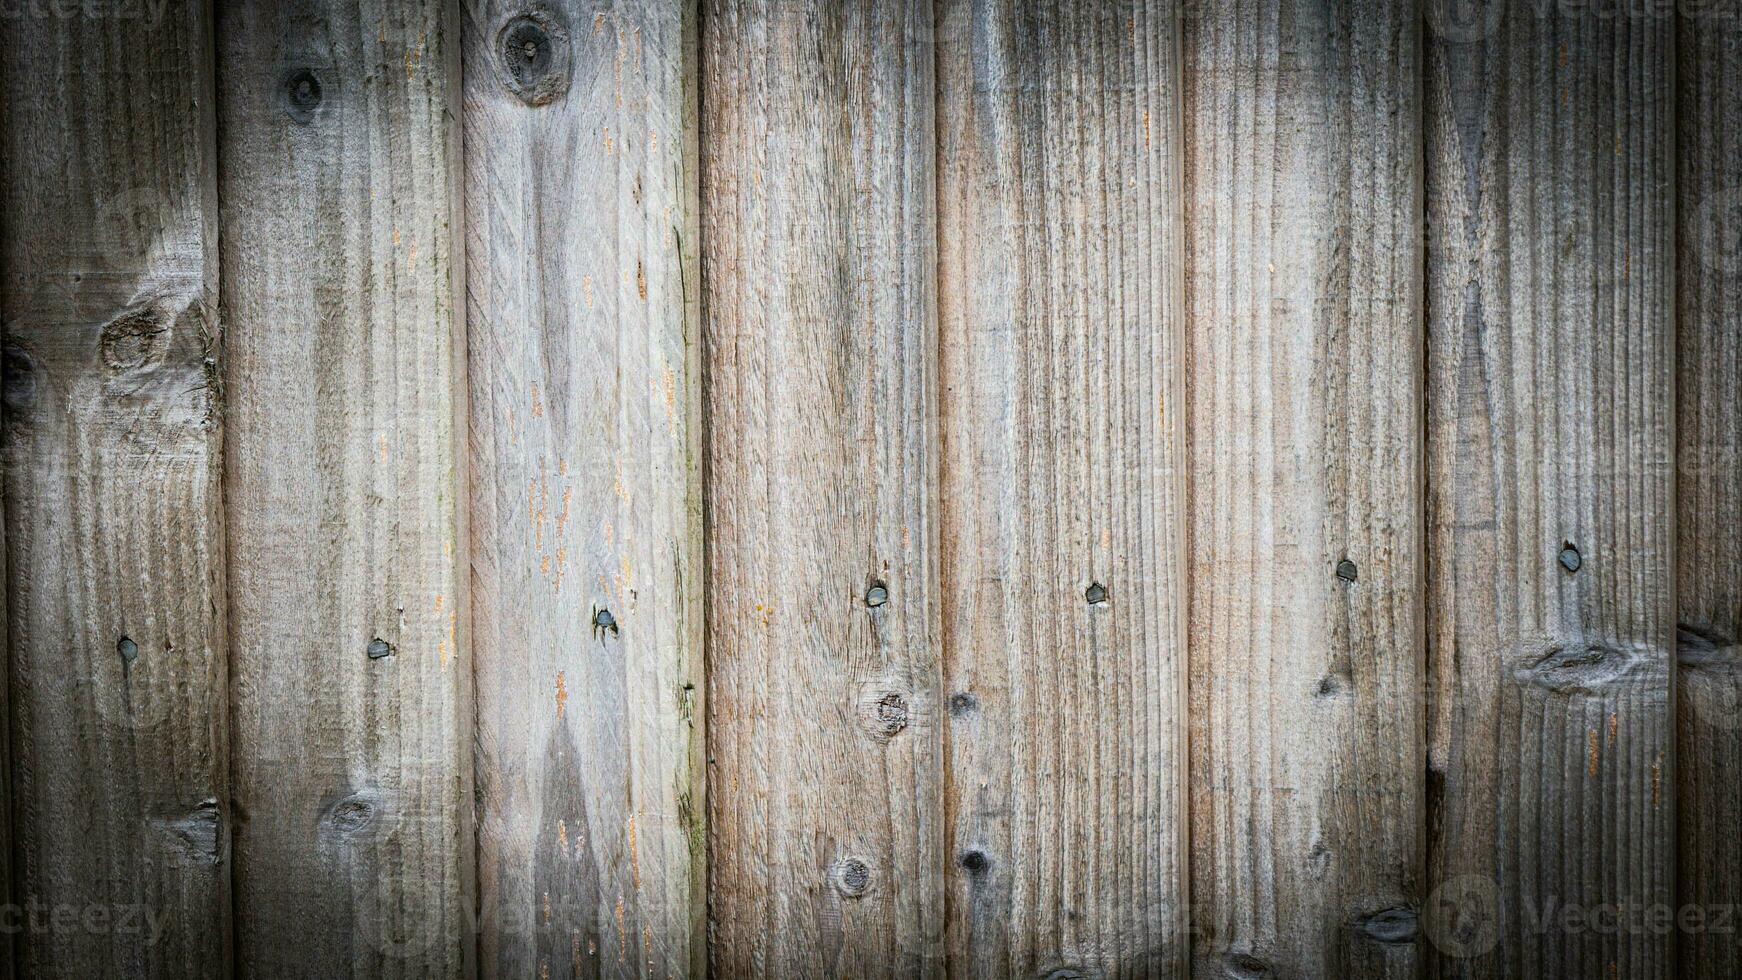 Natural Wood Grain Texture Background photo